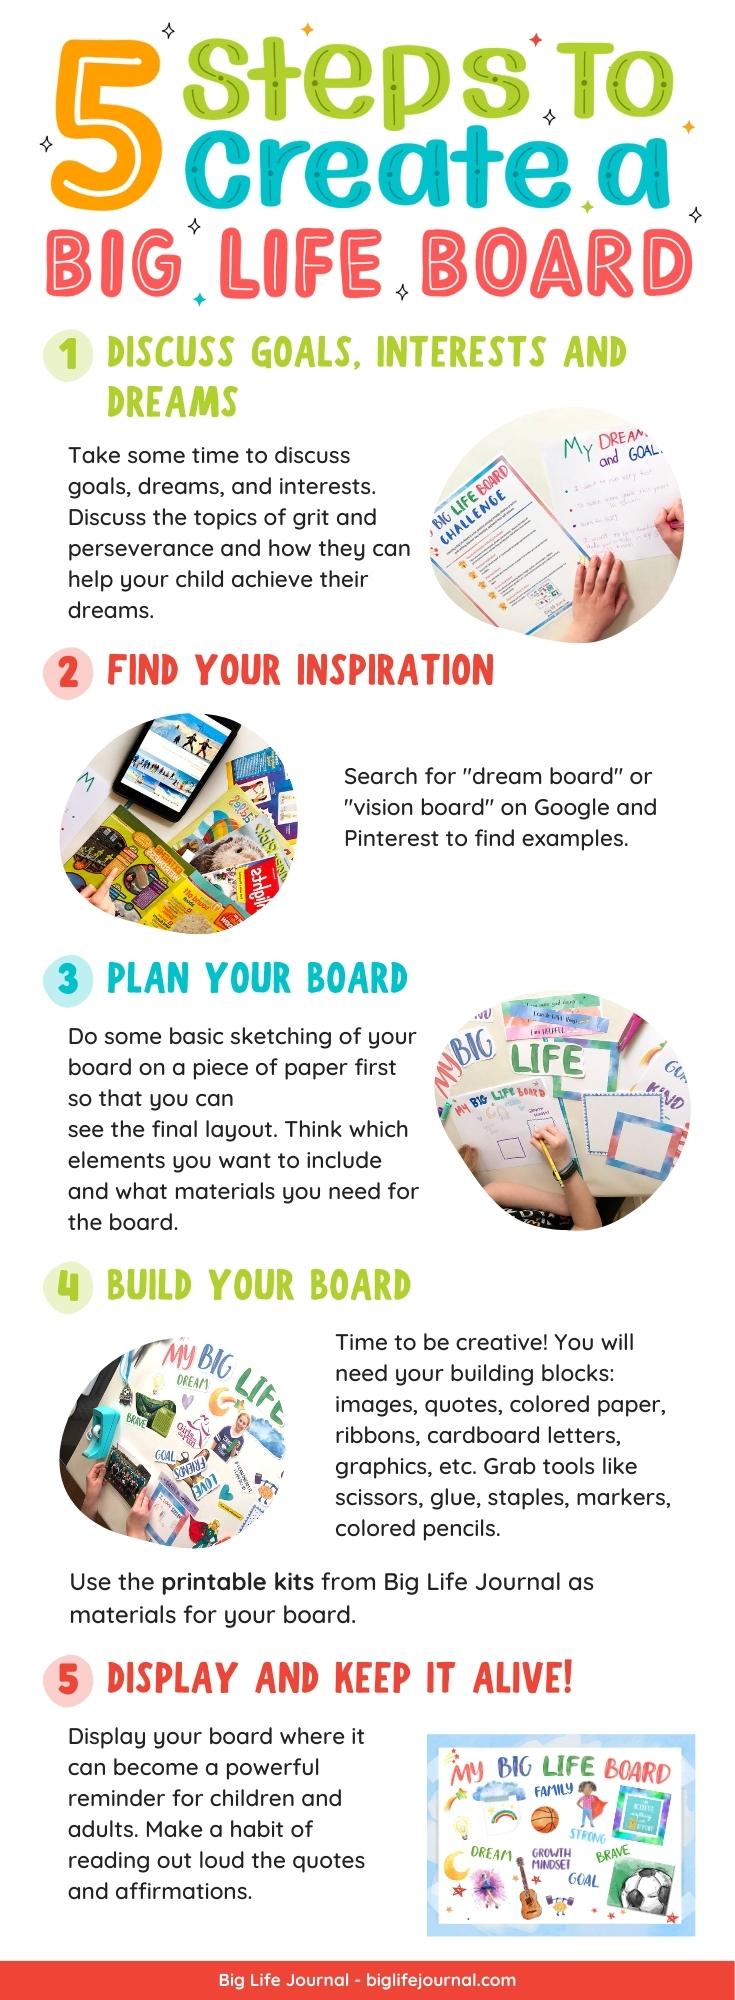 I tried 3 vision board kits: what's inside and which is the best